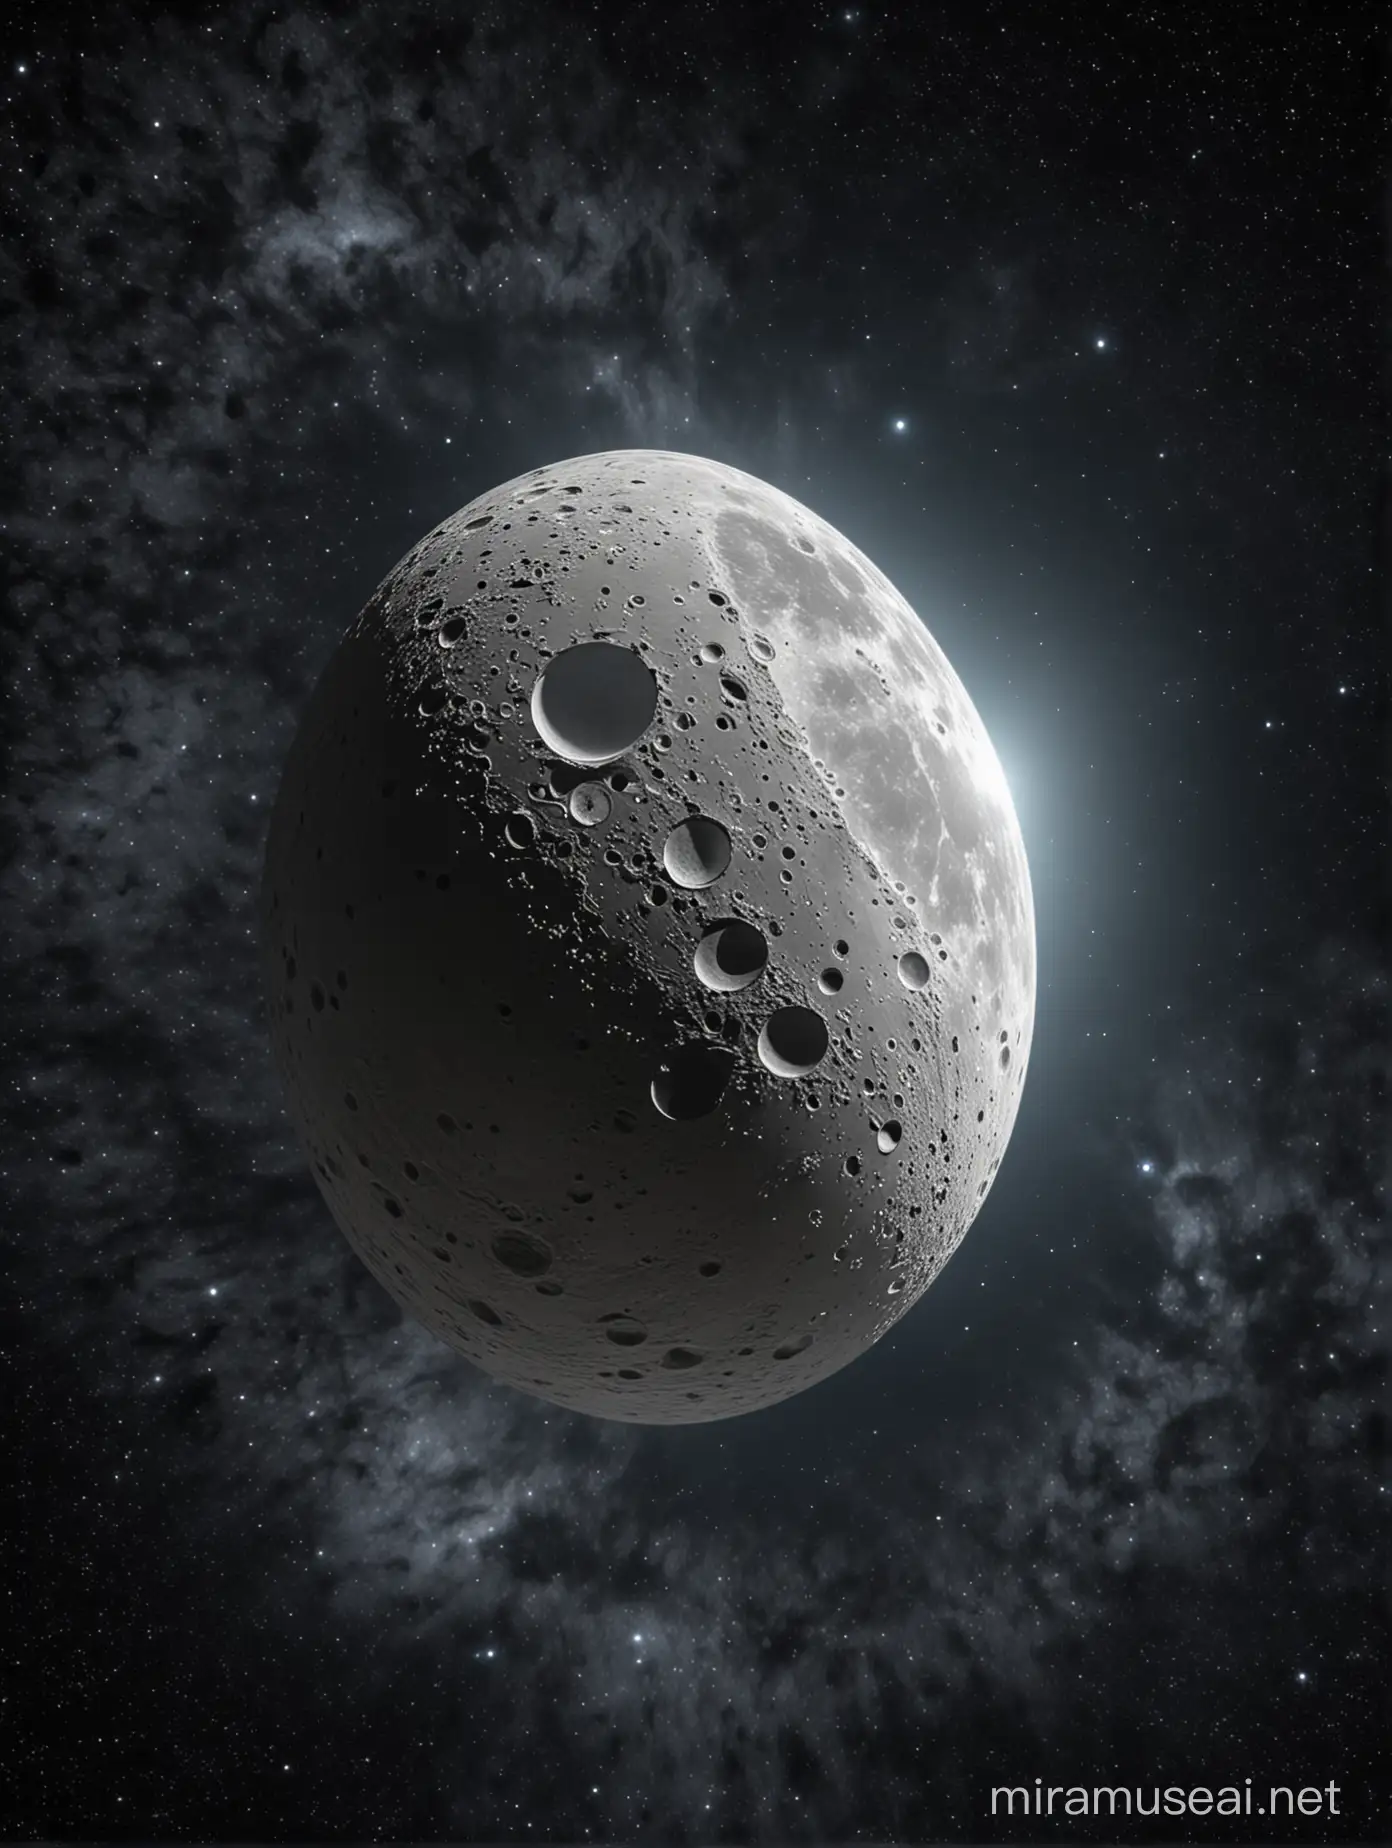 4k resolution photo realistic moon shaped like an egg. the moon should be floating in space with a beatiful starry background